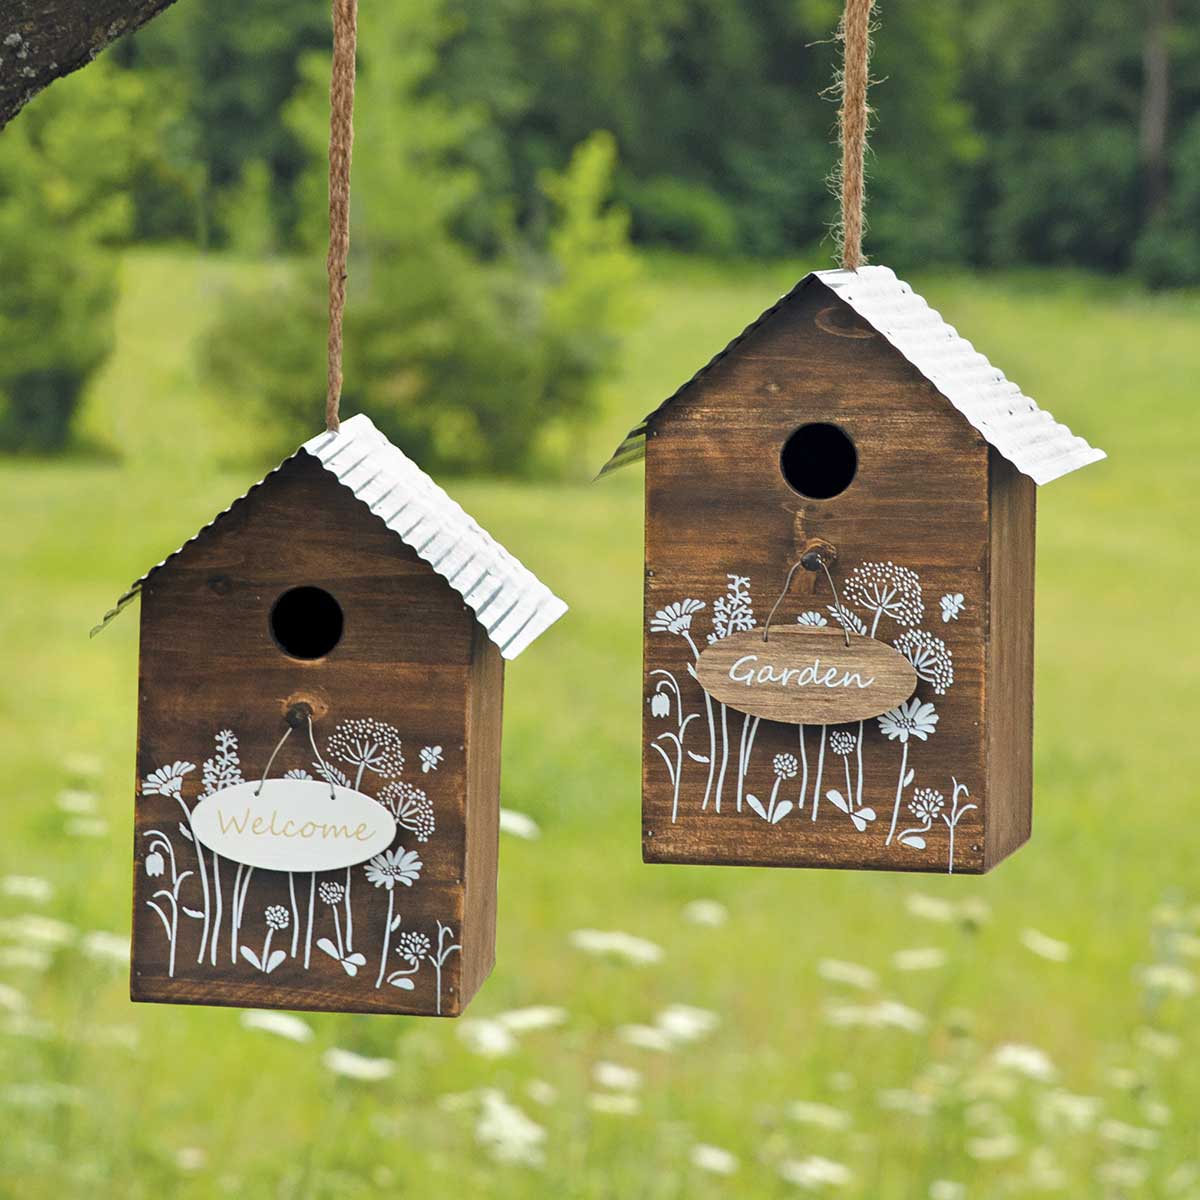 BIRD HOUSE 2 ASSORTED 7.5IN X 6.75IN X 9.5IN BR/WHITE WOOD/METAL - Click Image to Close